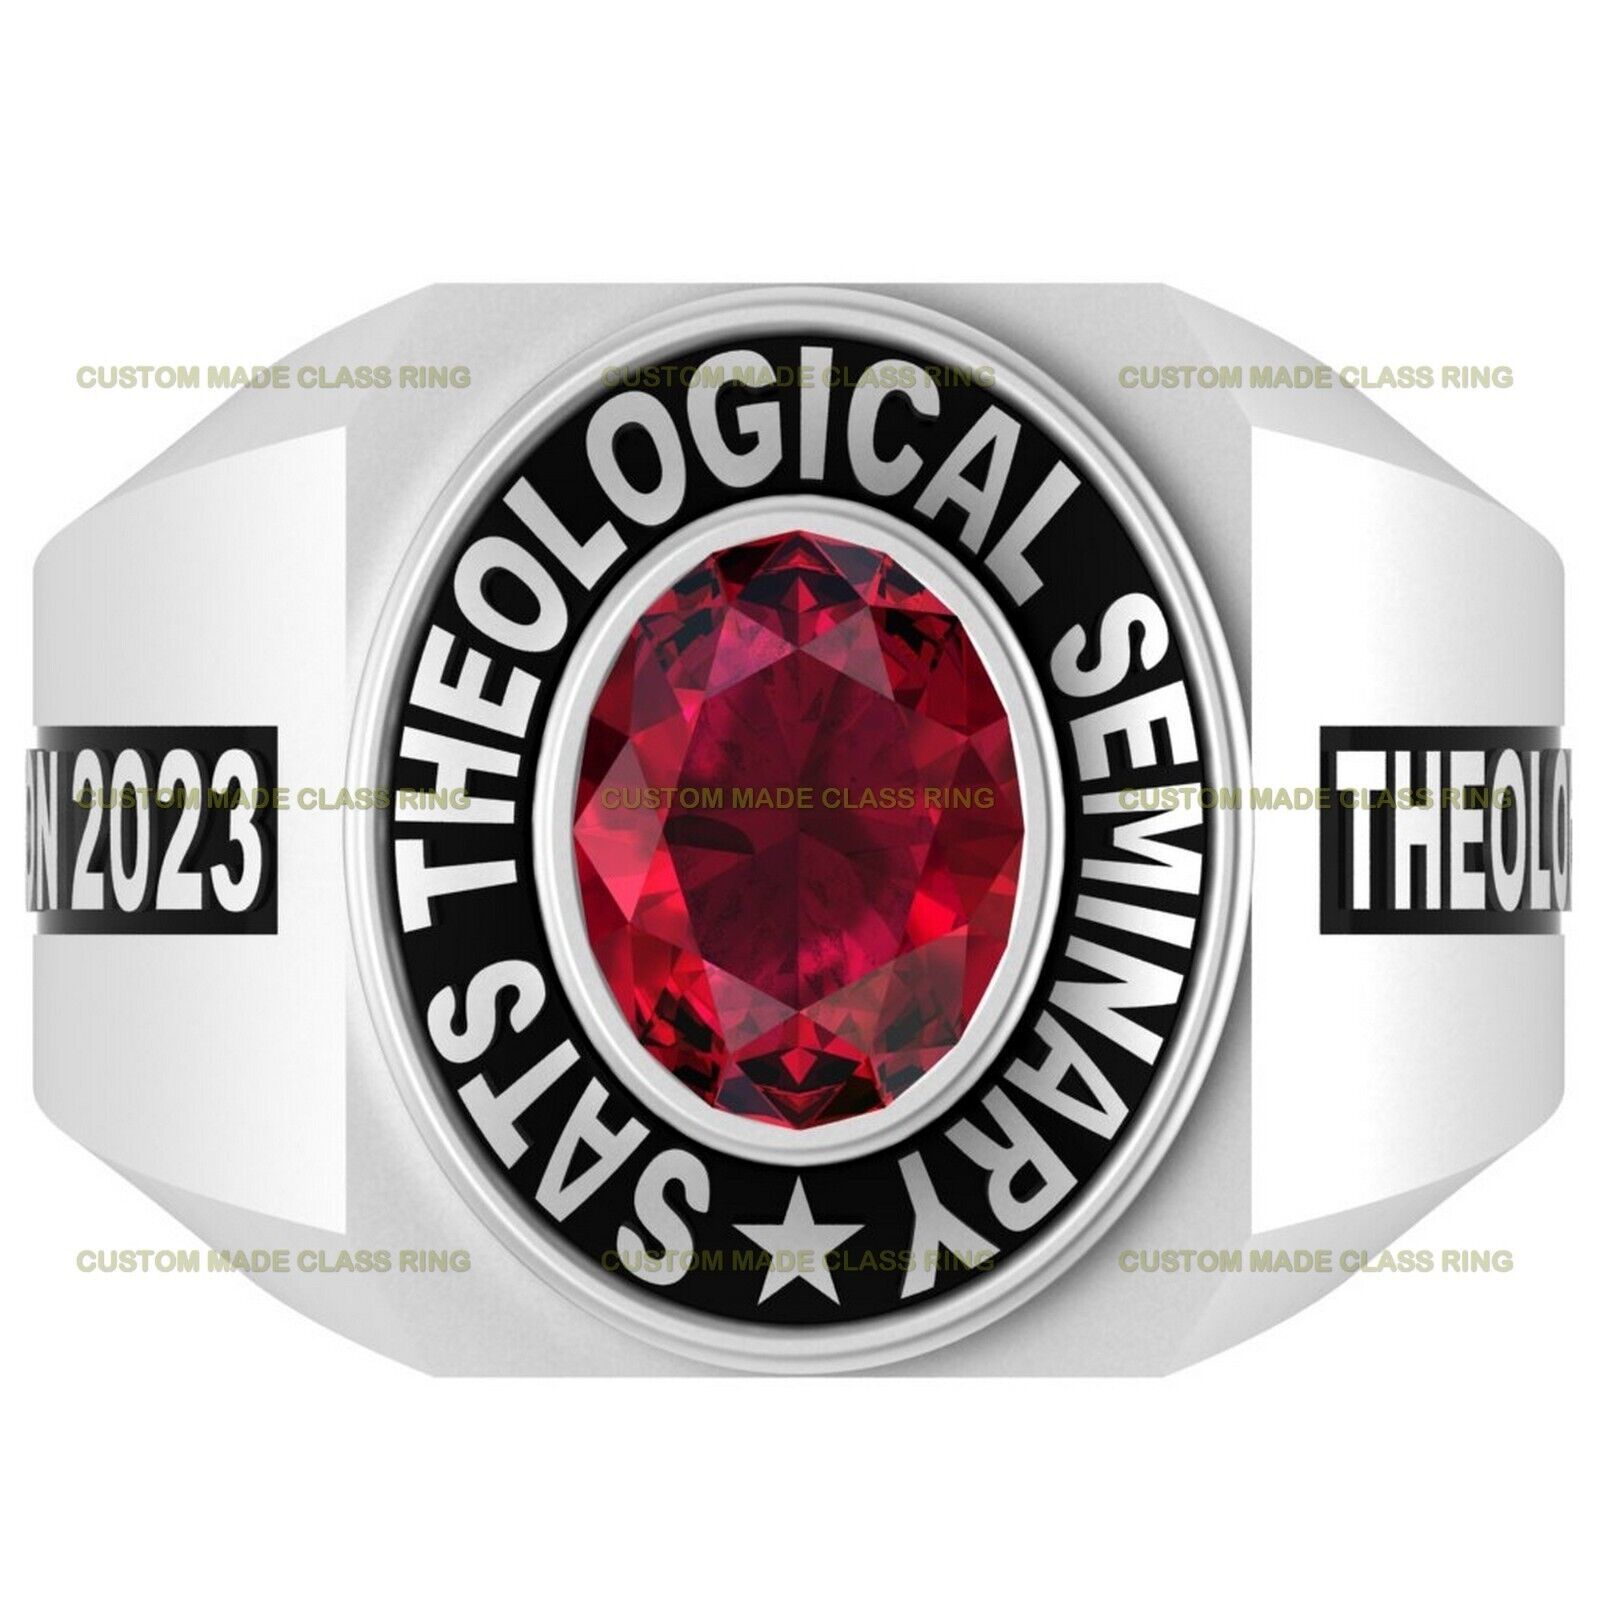 Primary image for Men School Class Ring Customized the Great High School College Graduation Ring